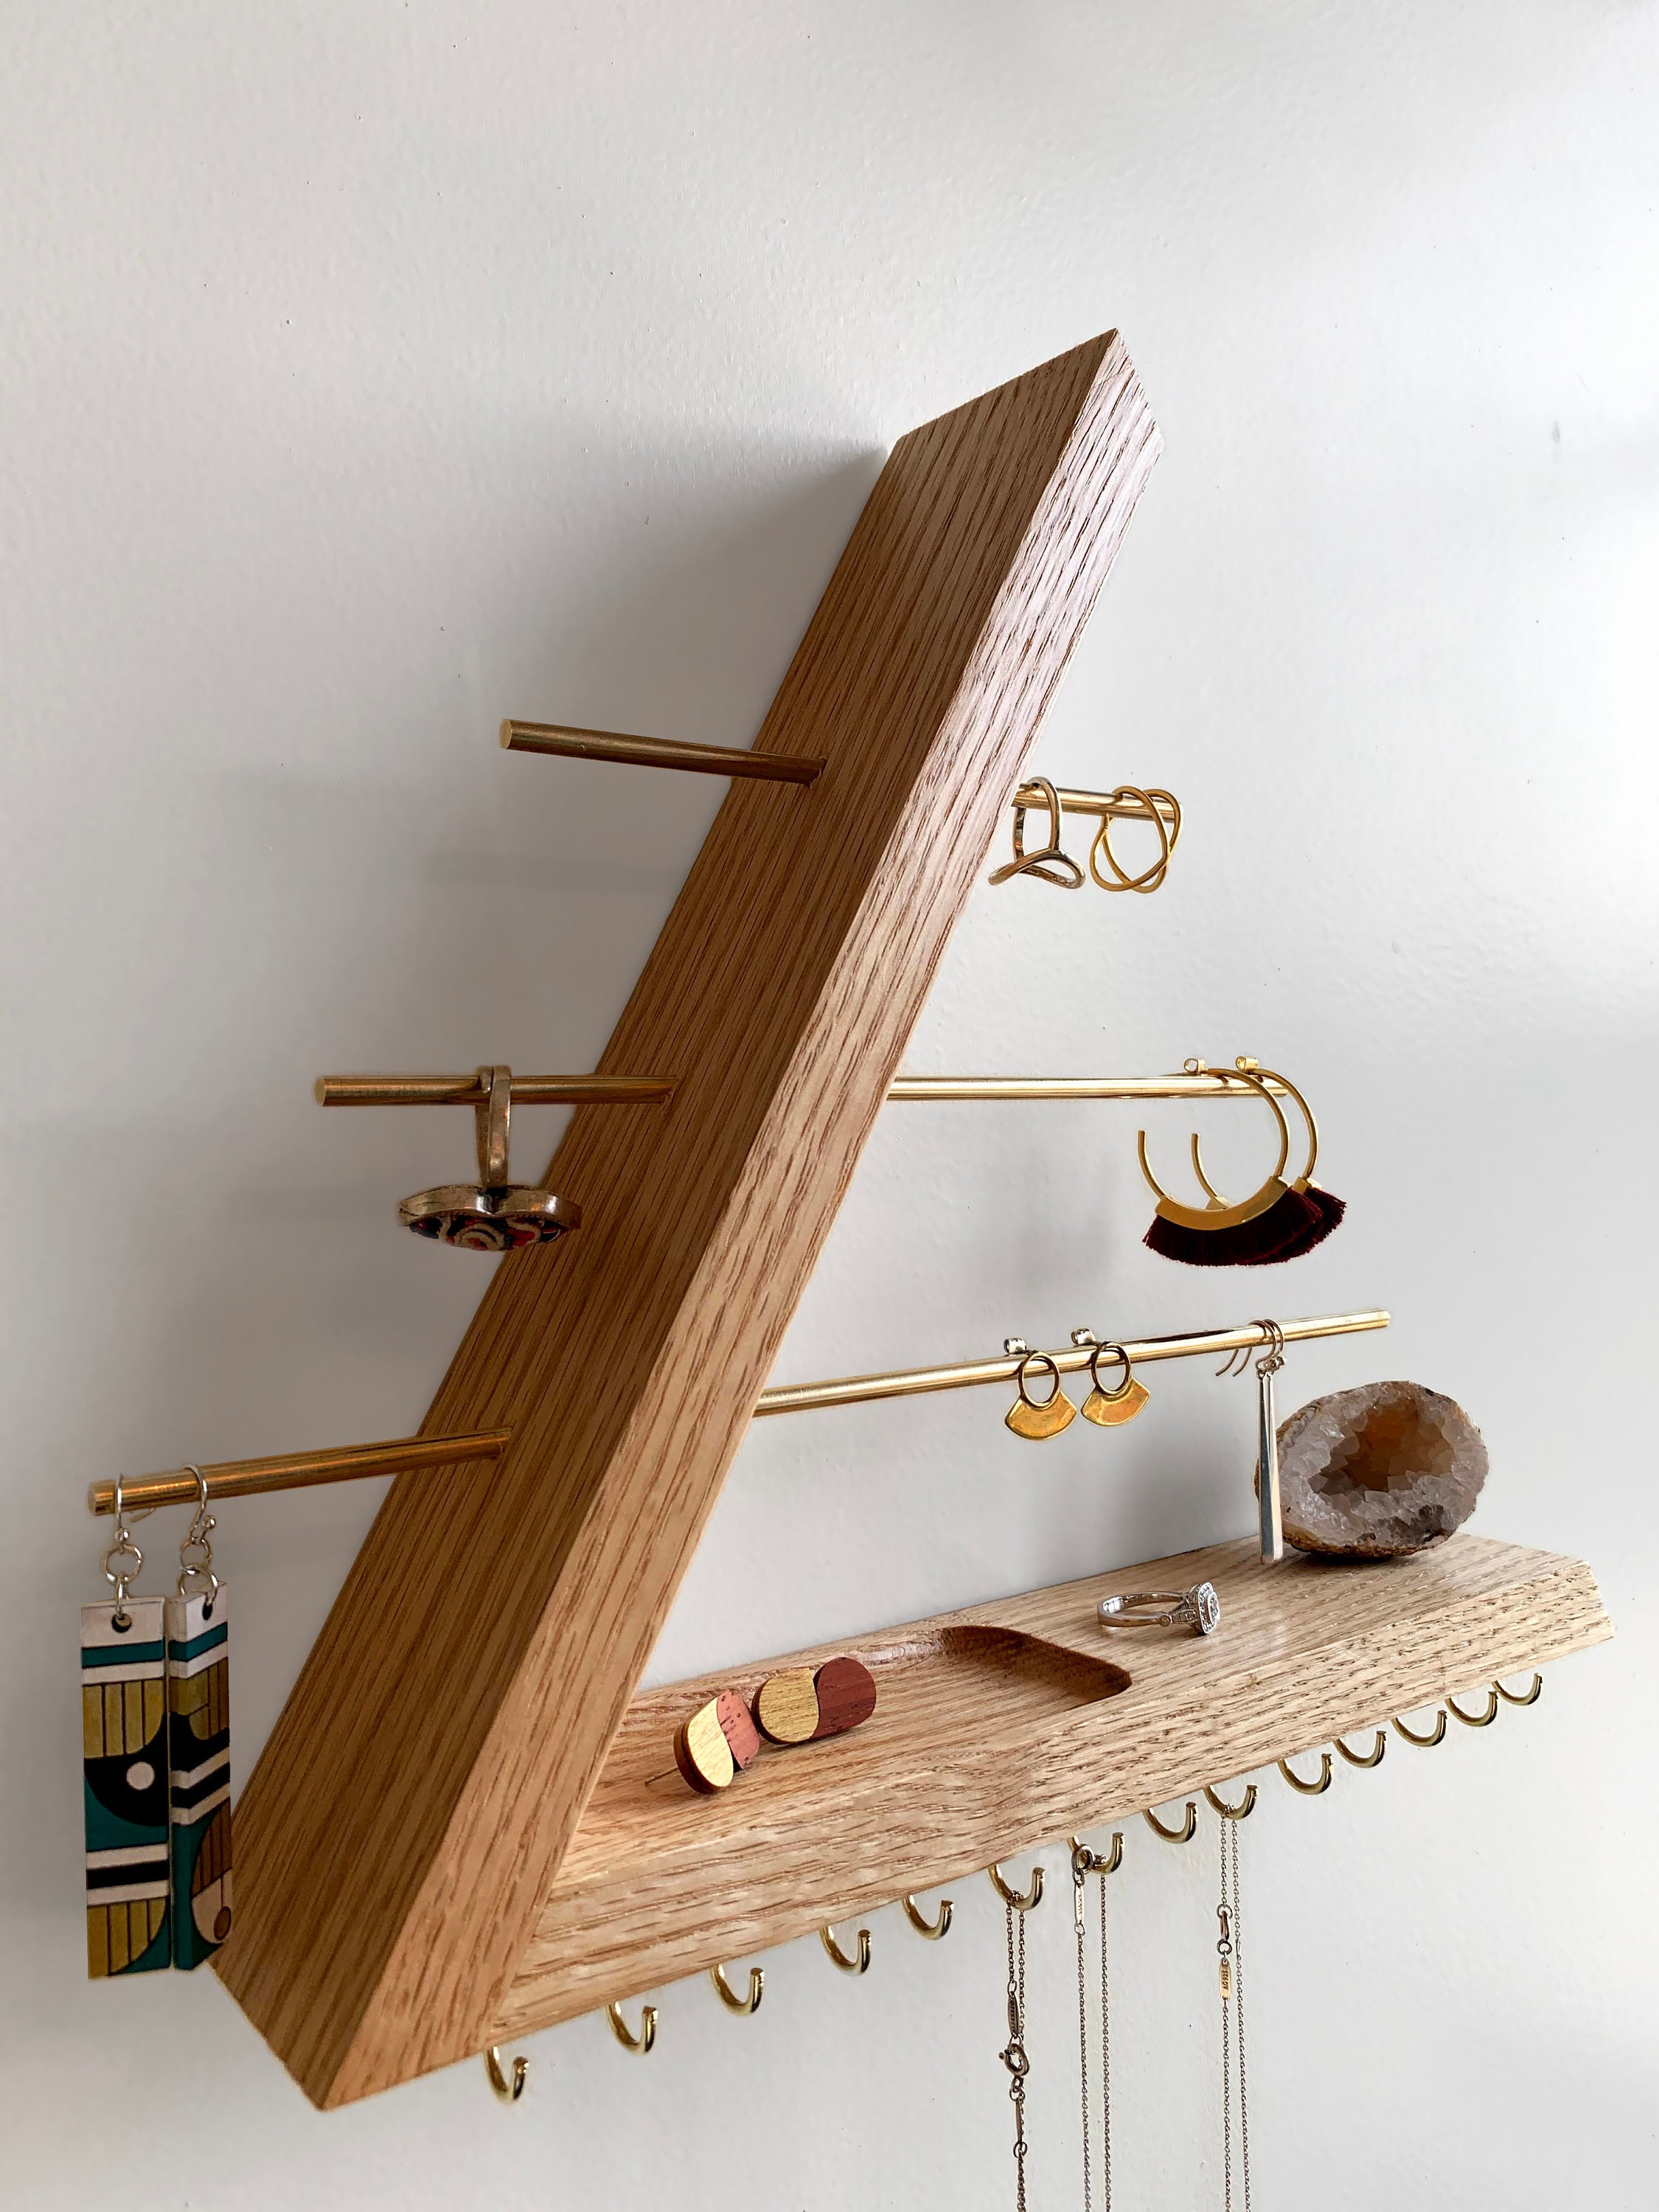 Deluxe Jewelry Holder Organizer Honey Oak – Jewelry Holders For You